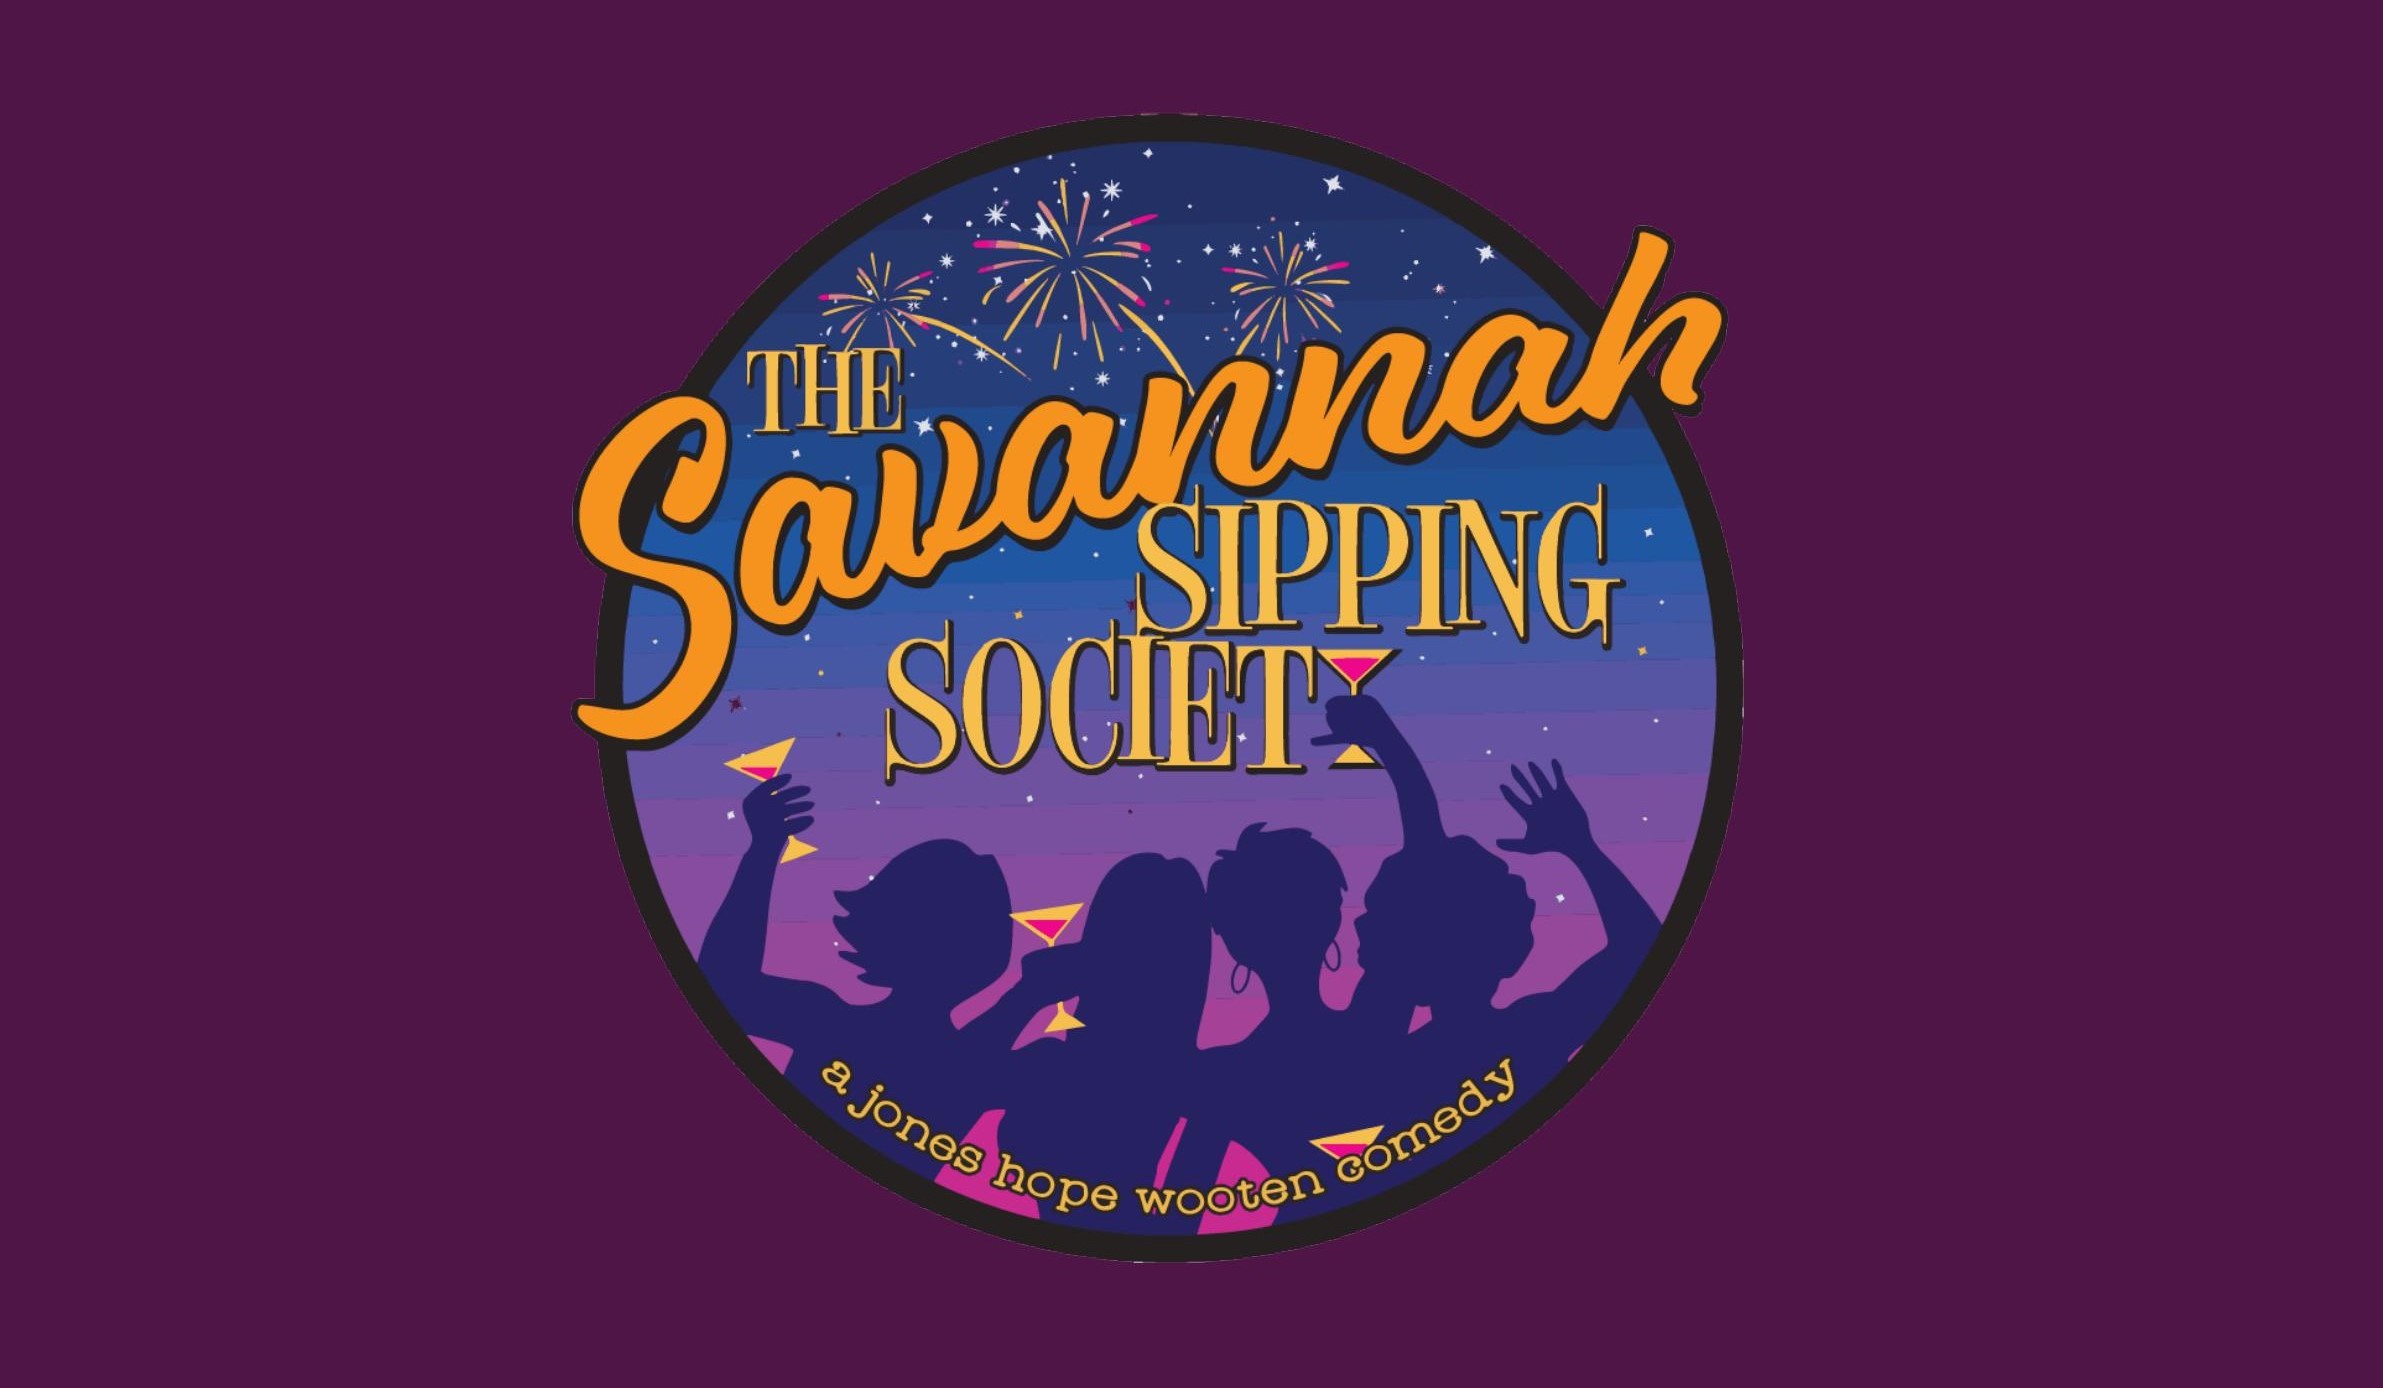 poster titled "The Savannah Sipping Society" with logo depicting the outline of 4 women drinking wine.